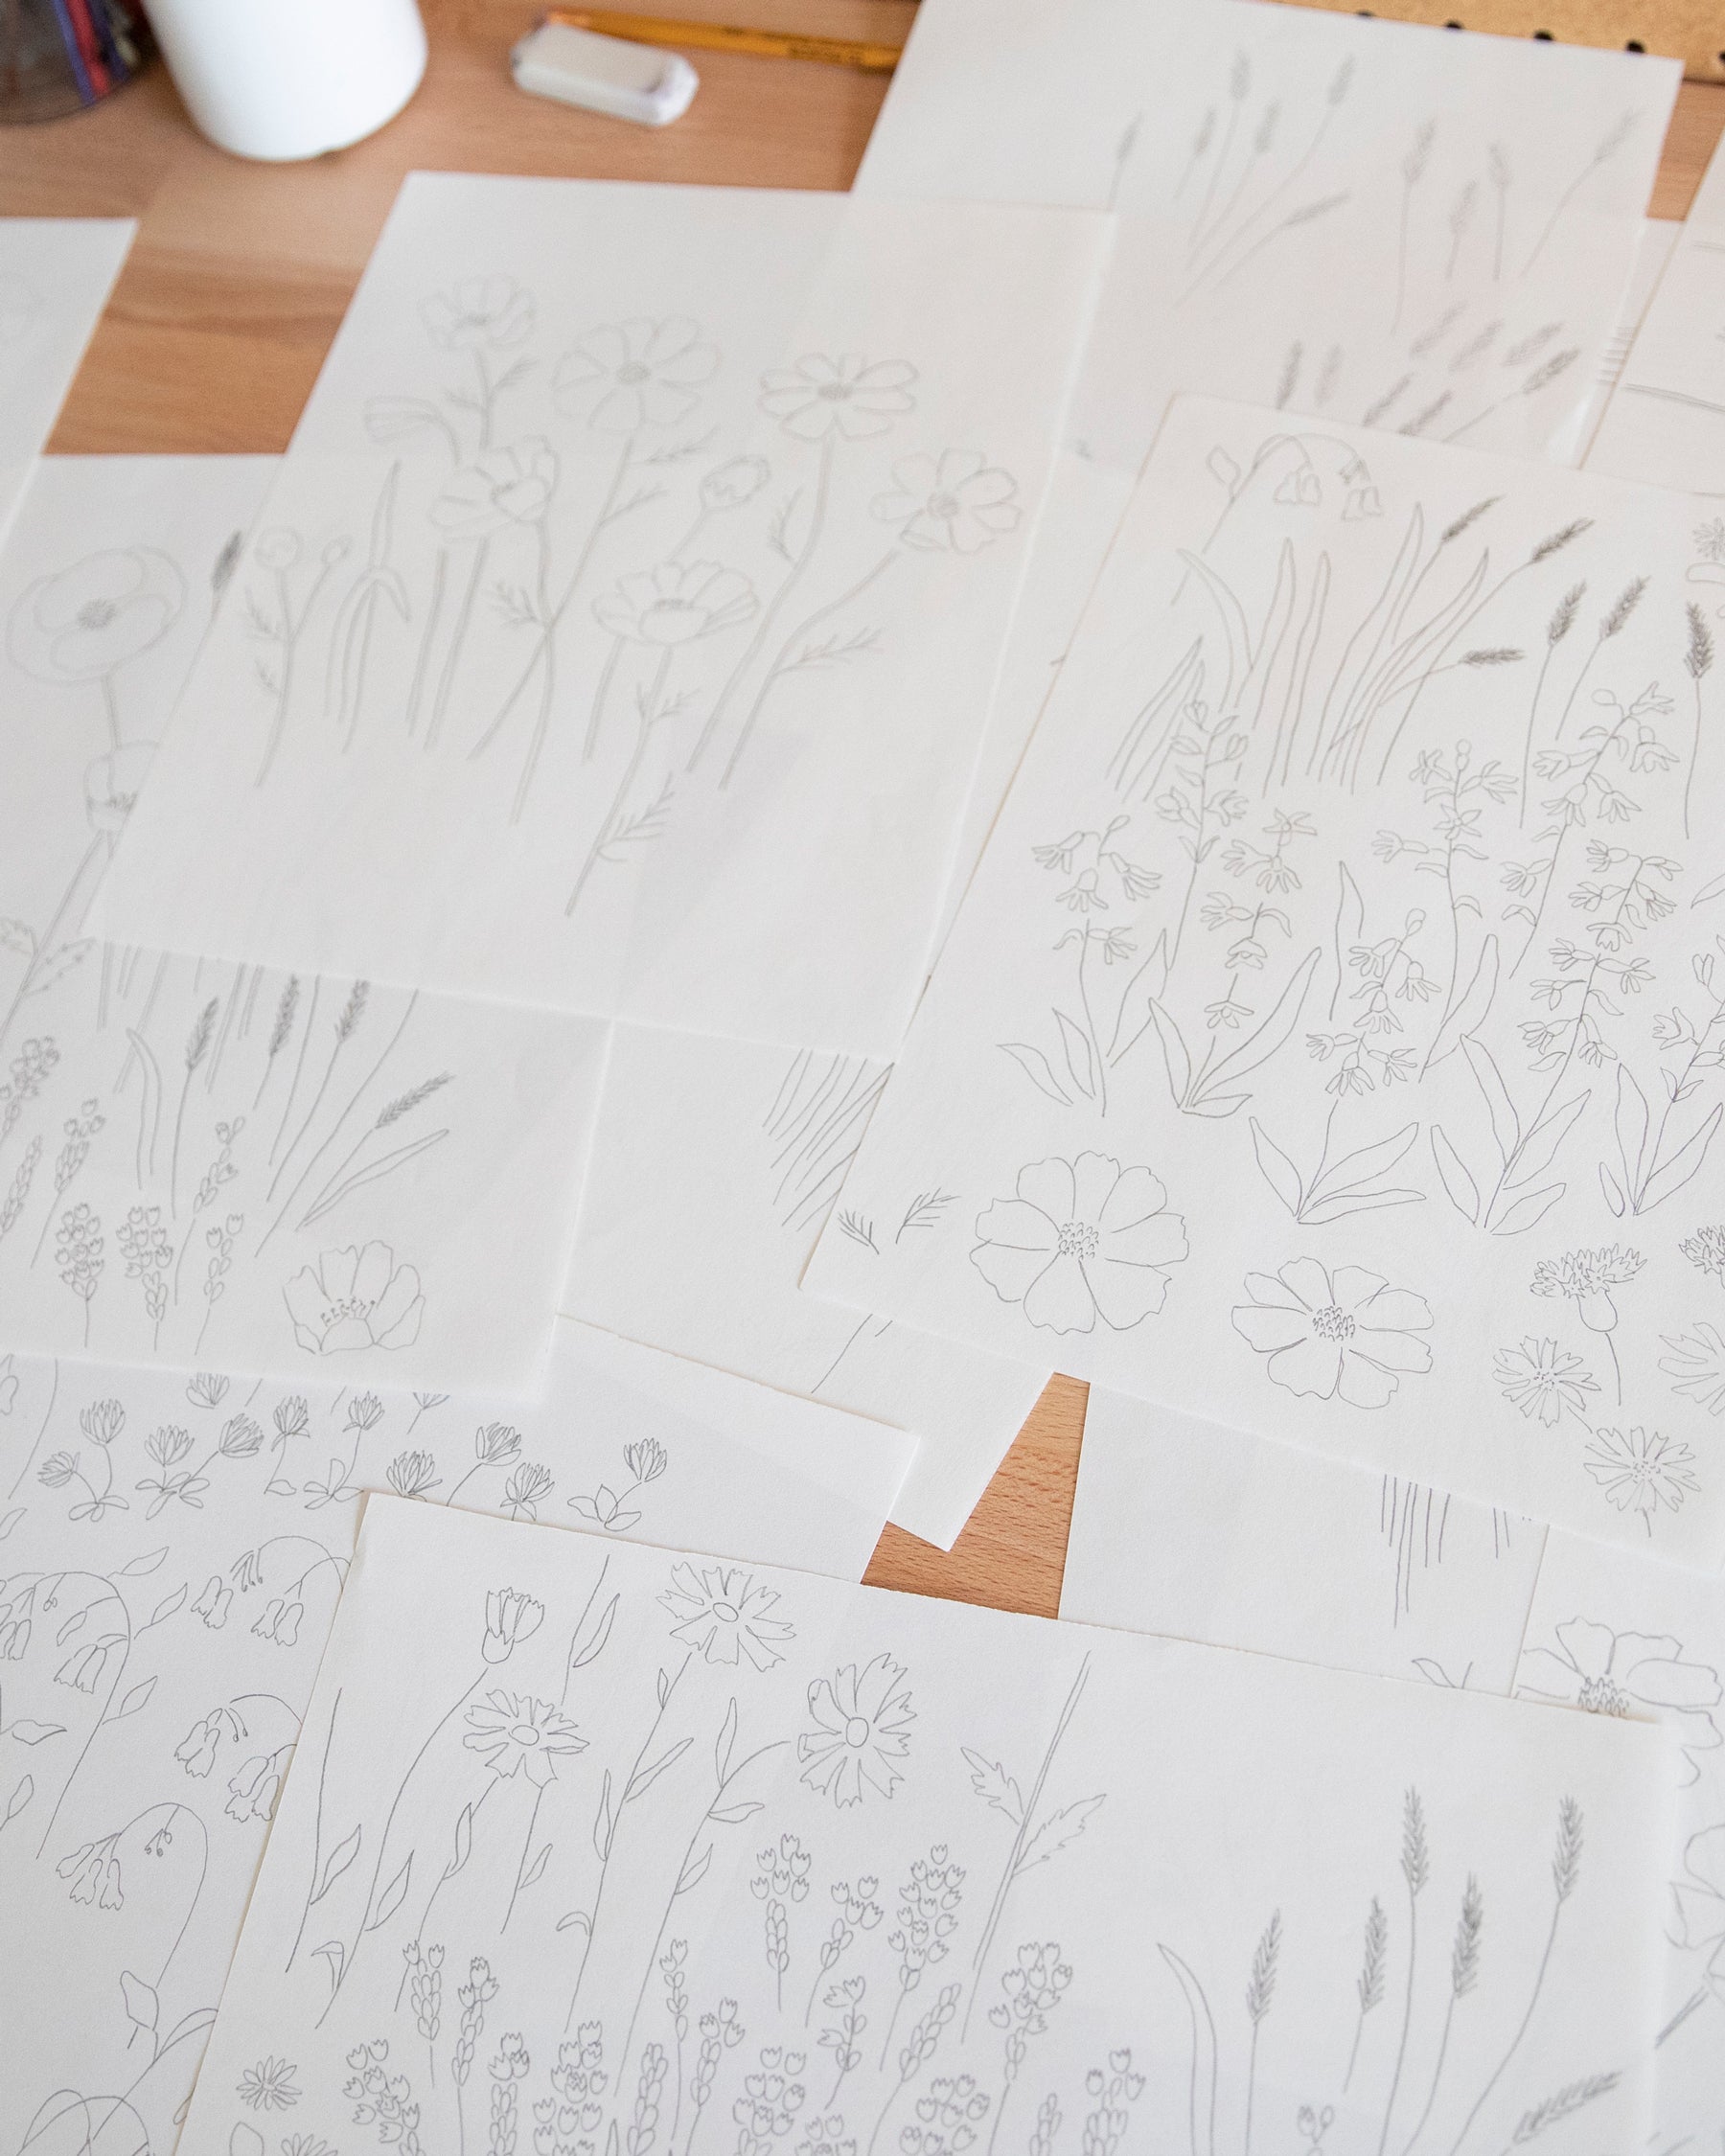 papers with drawings on them on a table